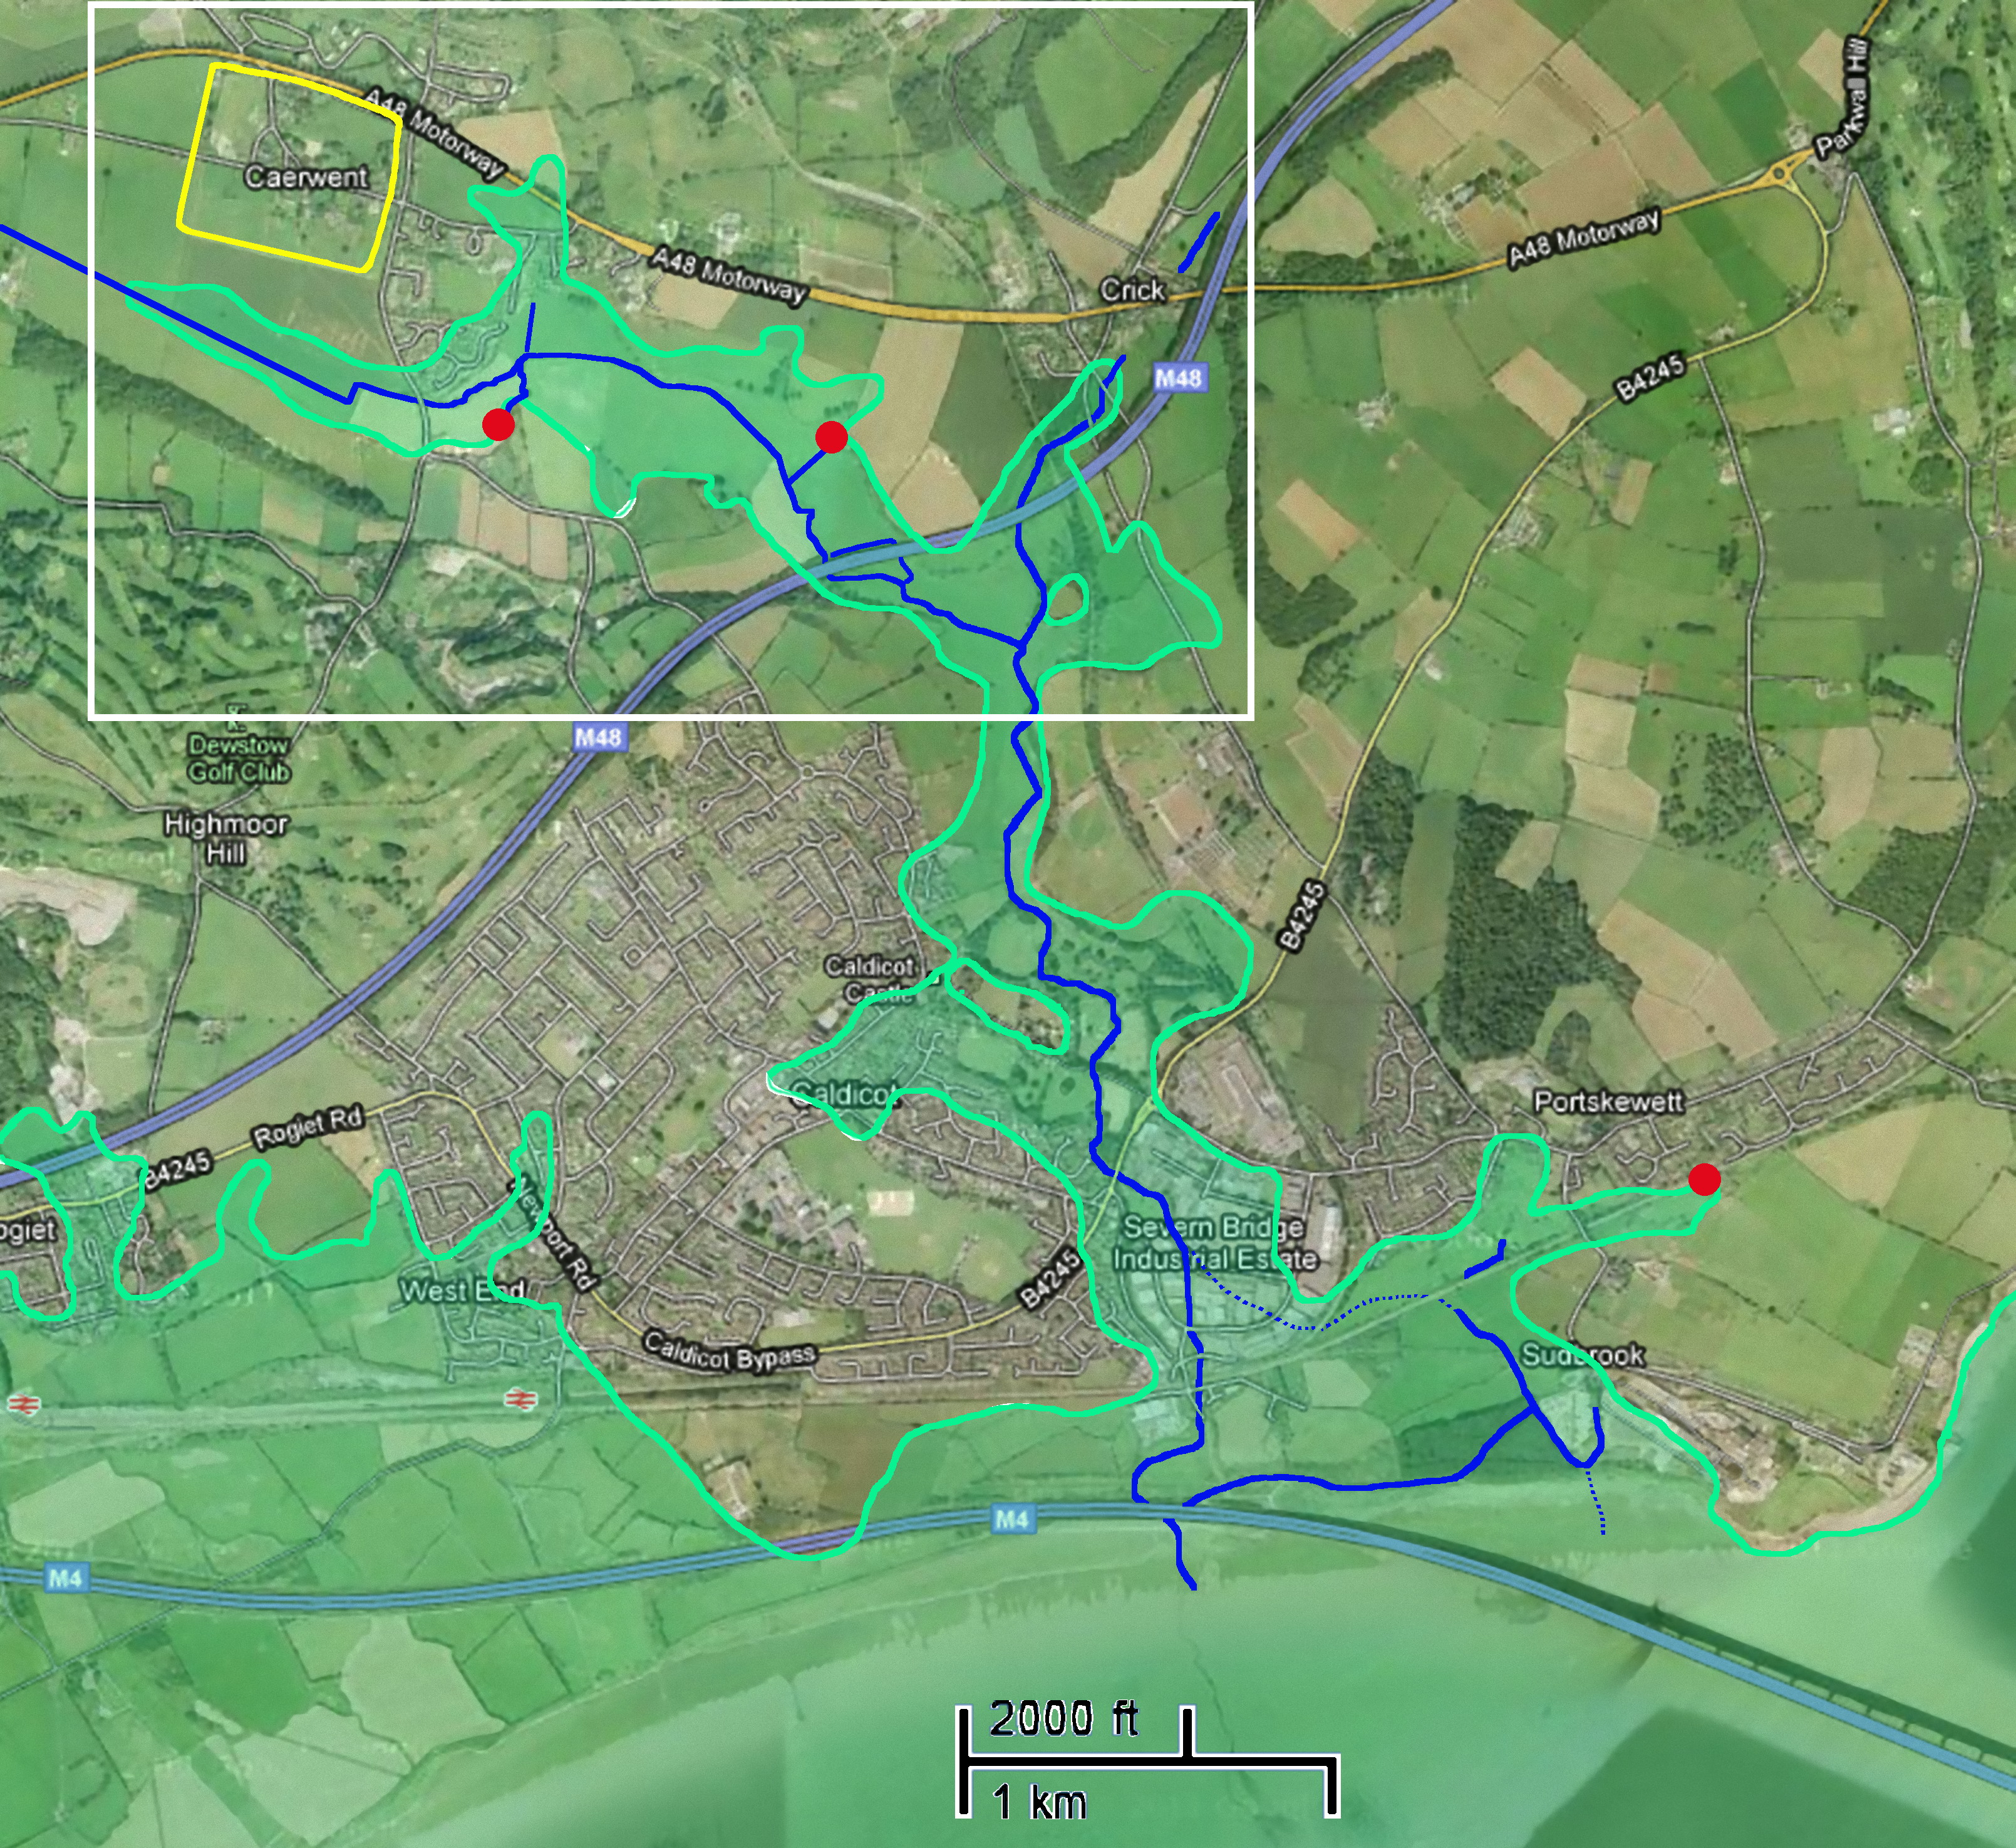 aerial view of the area between Caerwent and Sudbrook, with the course of the Troggy Brook and the positions of the Whirlyholes marked